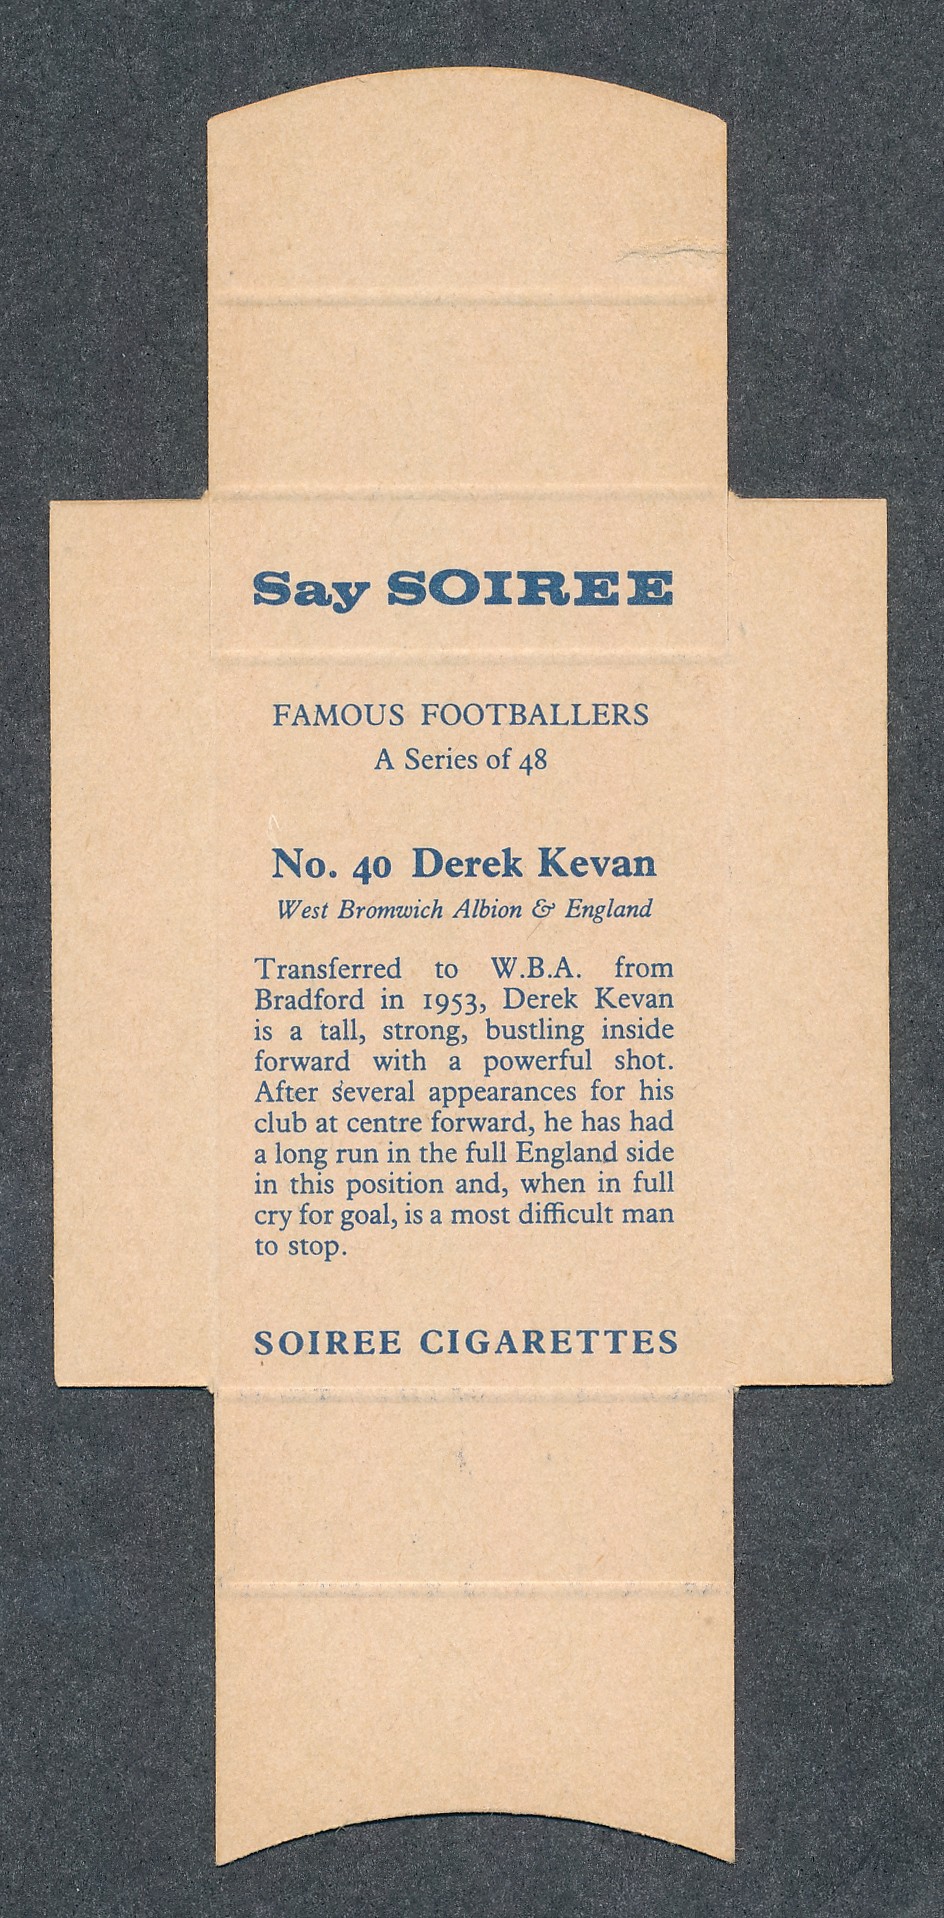 Soiree Cigarettes, Mauritius, Famous Footballers uncut packet issue, No.40 Derek Kevan, West - Image 2 of 2